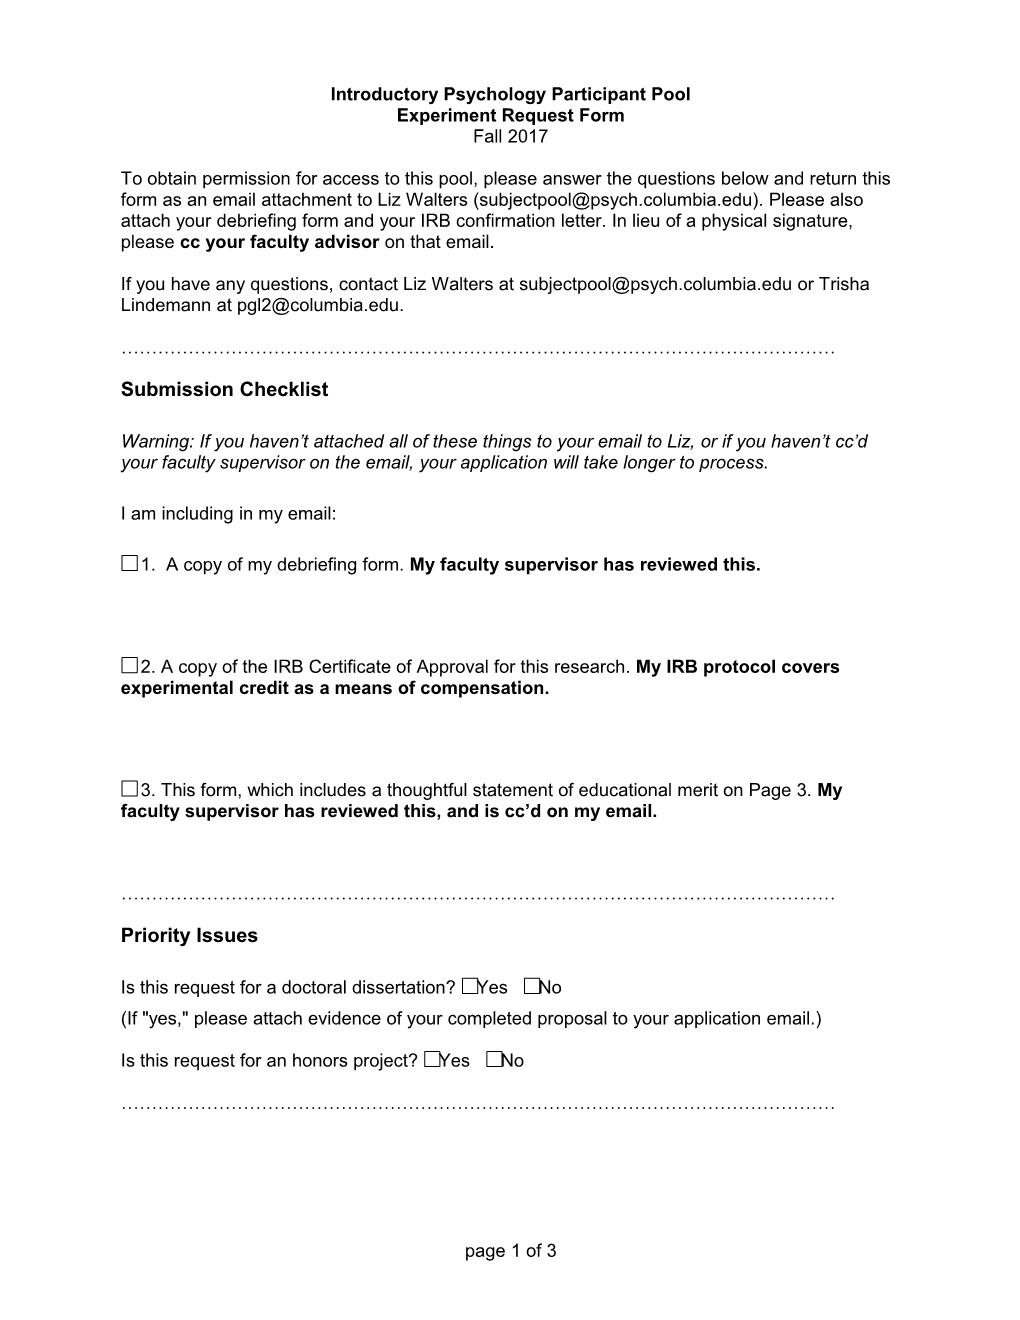 Introductory Psychology Participant Pool Experiment Request Form